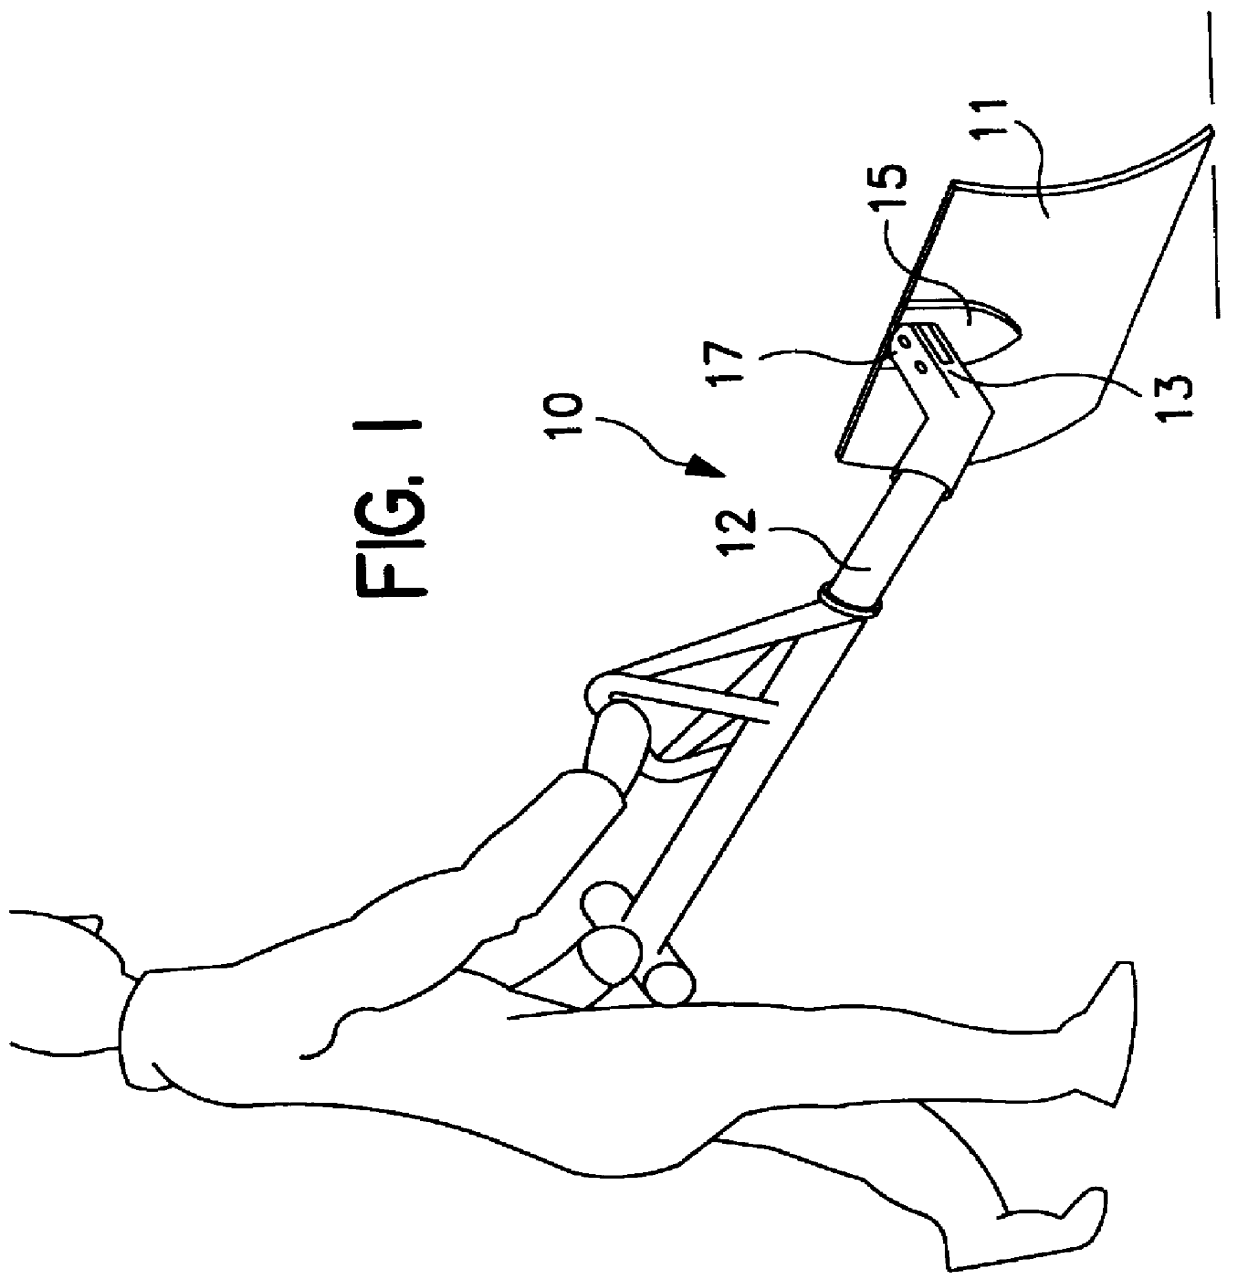 Manually-operable combination shovel and plow for snow and other material